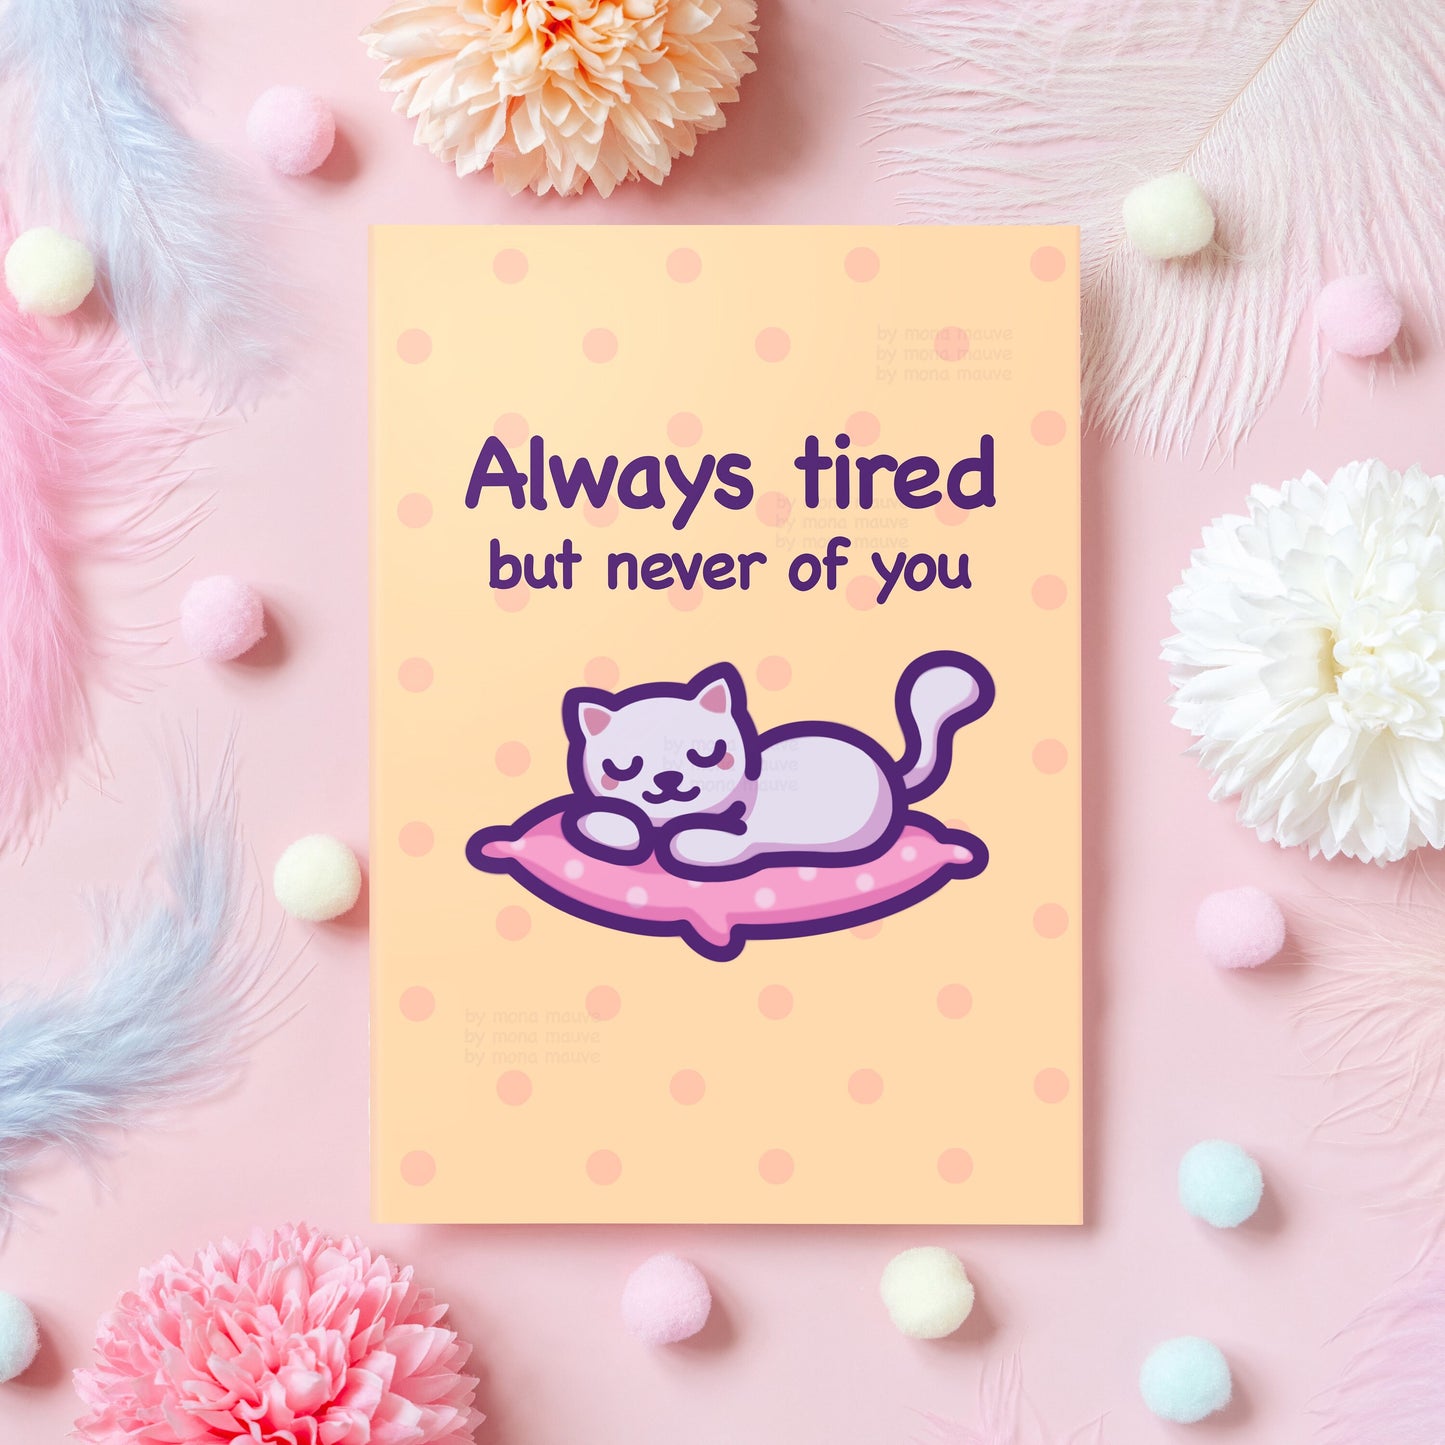 Cute Cat Love Card | Always Tired, but Never of You! | Cat Meme Card For Husband, Wife, Boyfriend, Girlfriend | Gift for Her or Him